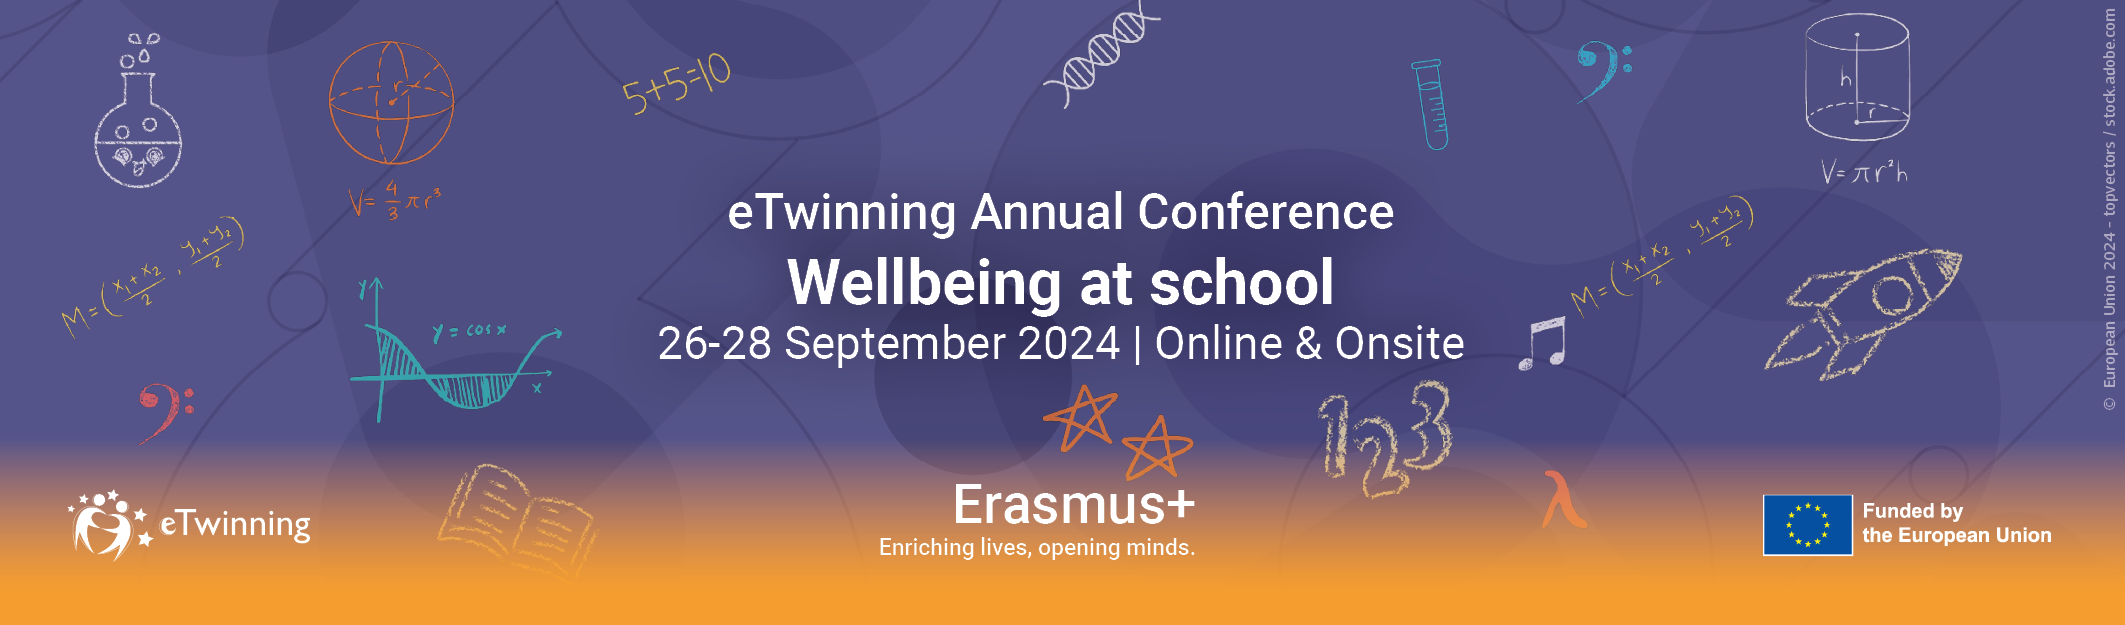 eTwinning Annual Conference 2024